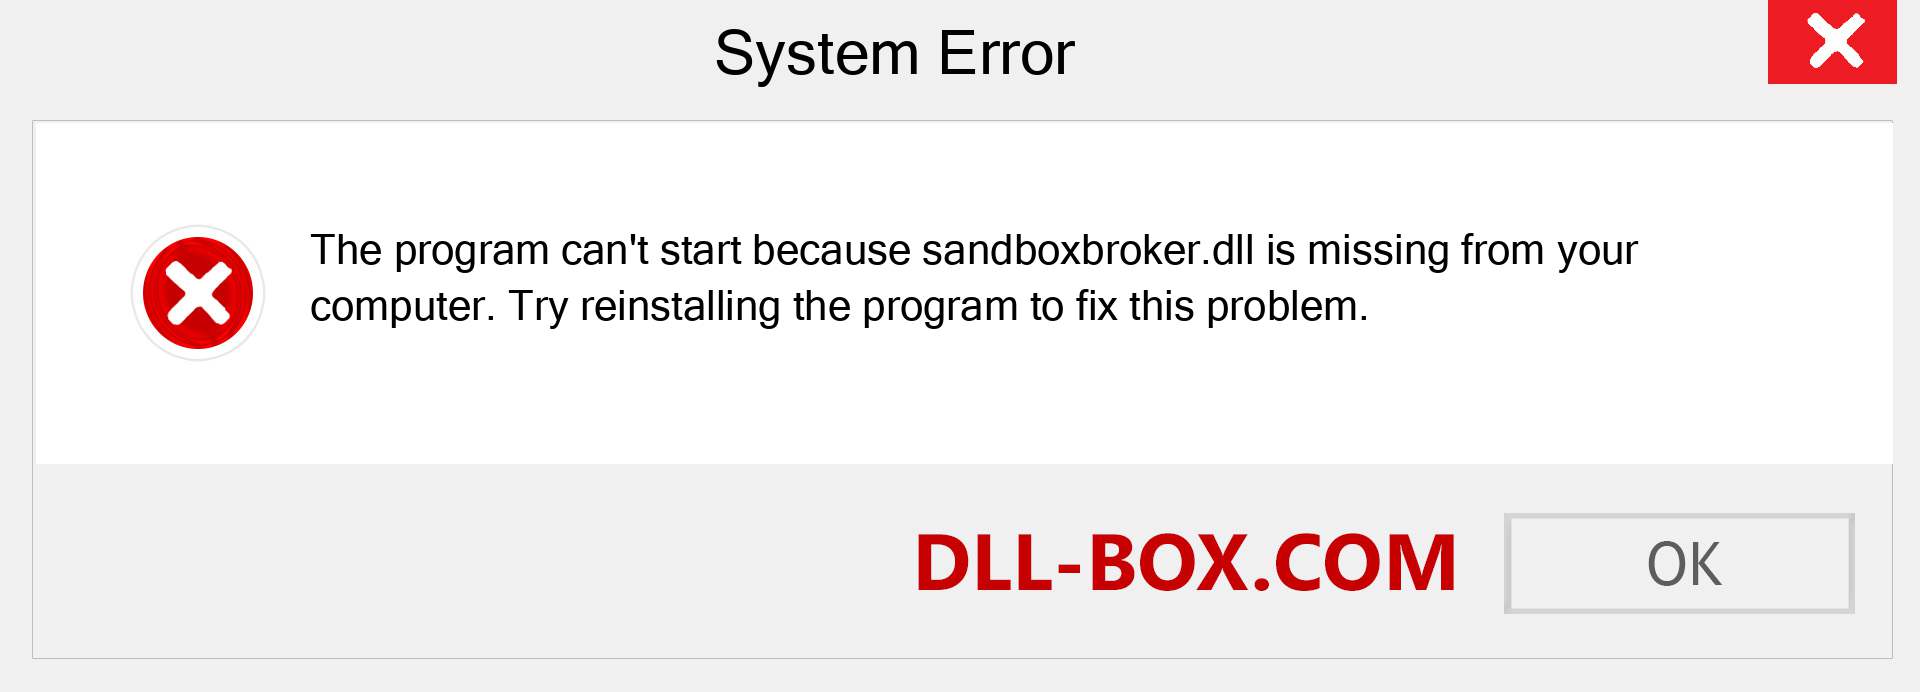  sandboxbroker.dll file is missing?. Download for Windows 7, 8, 10 - Fix  sandboxbroker dll Missing Error on Windows, photos, images